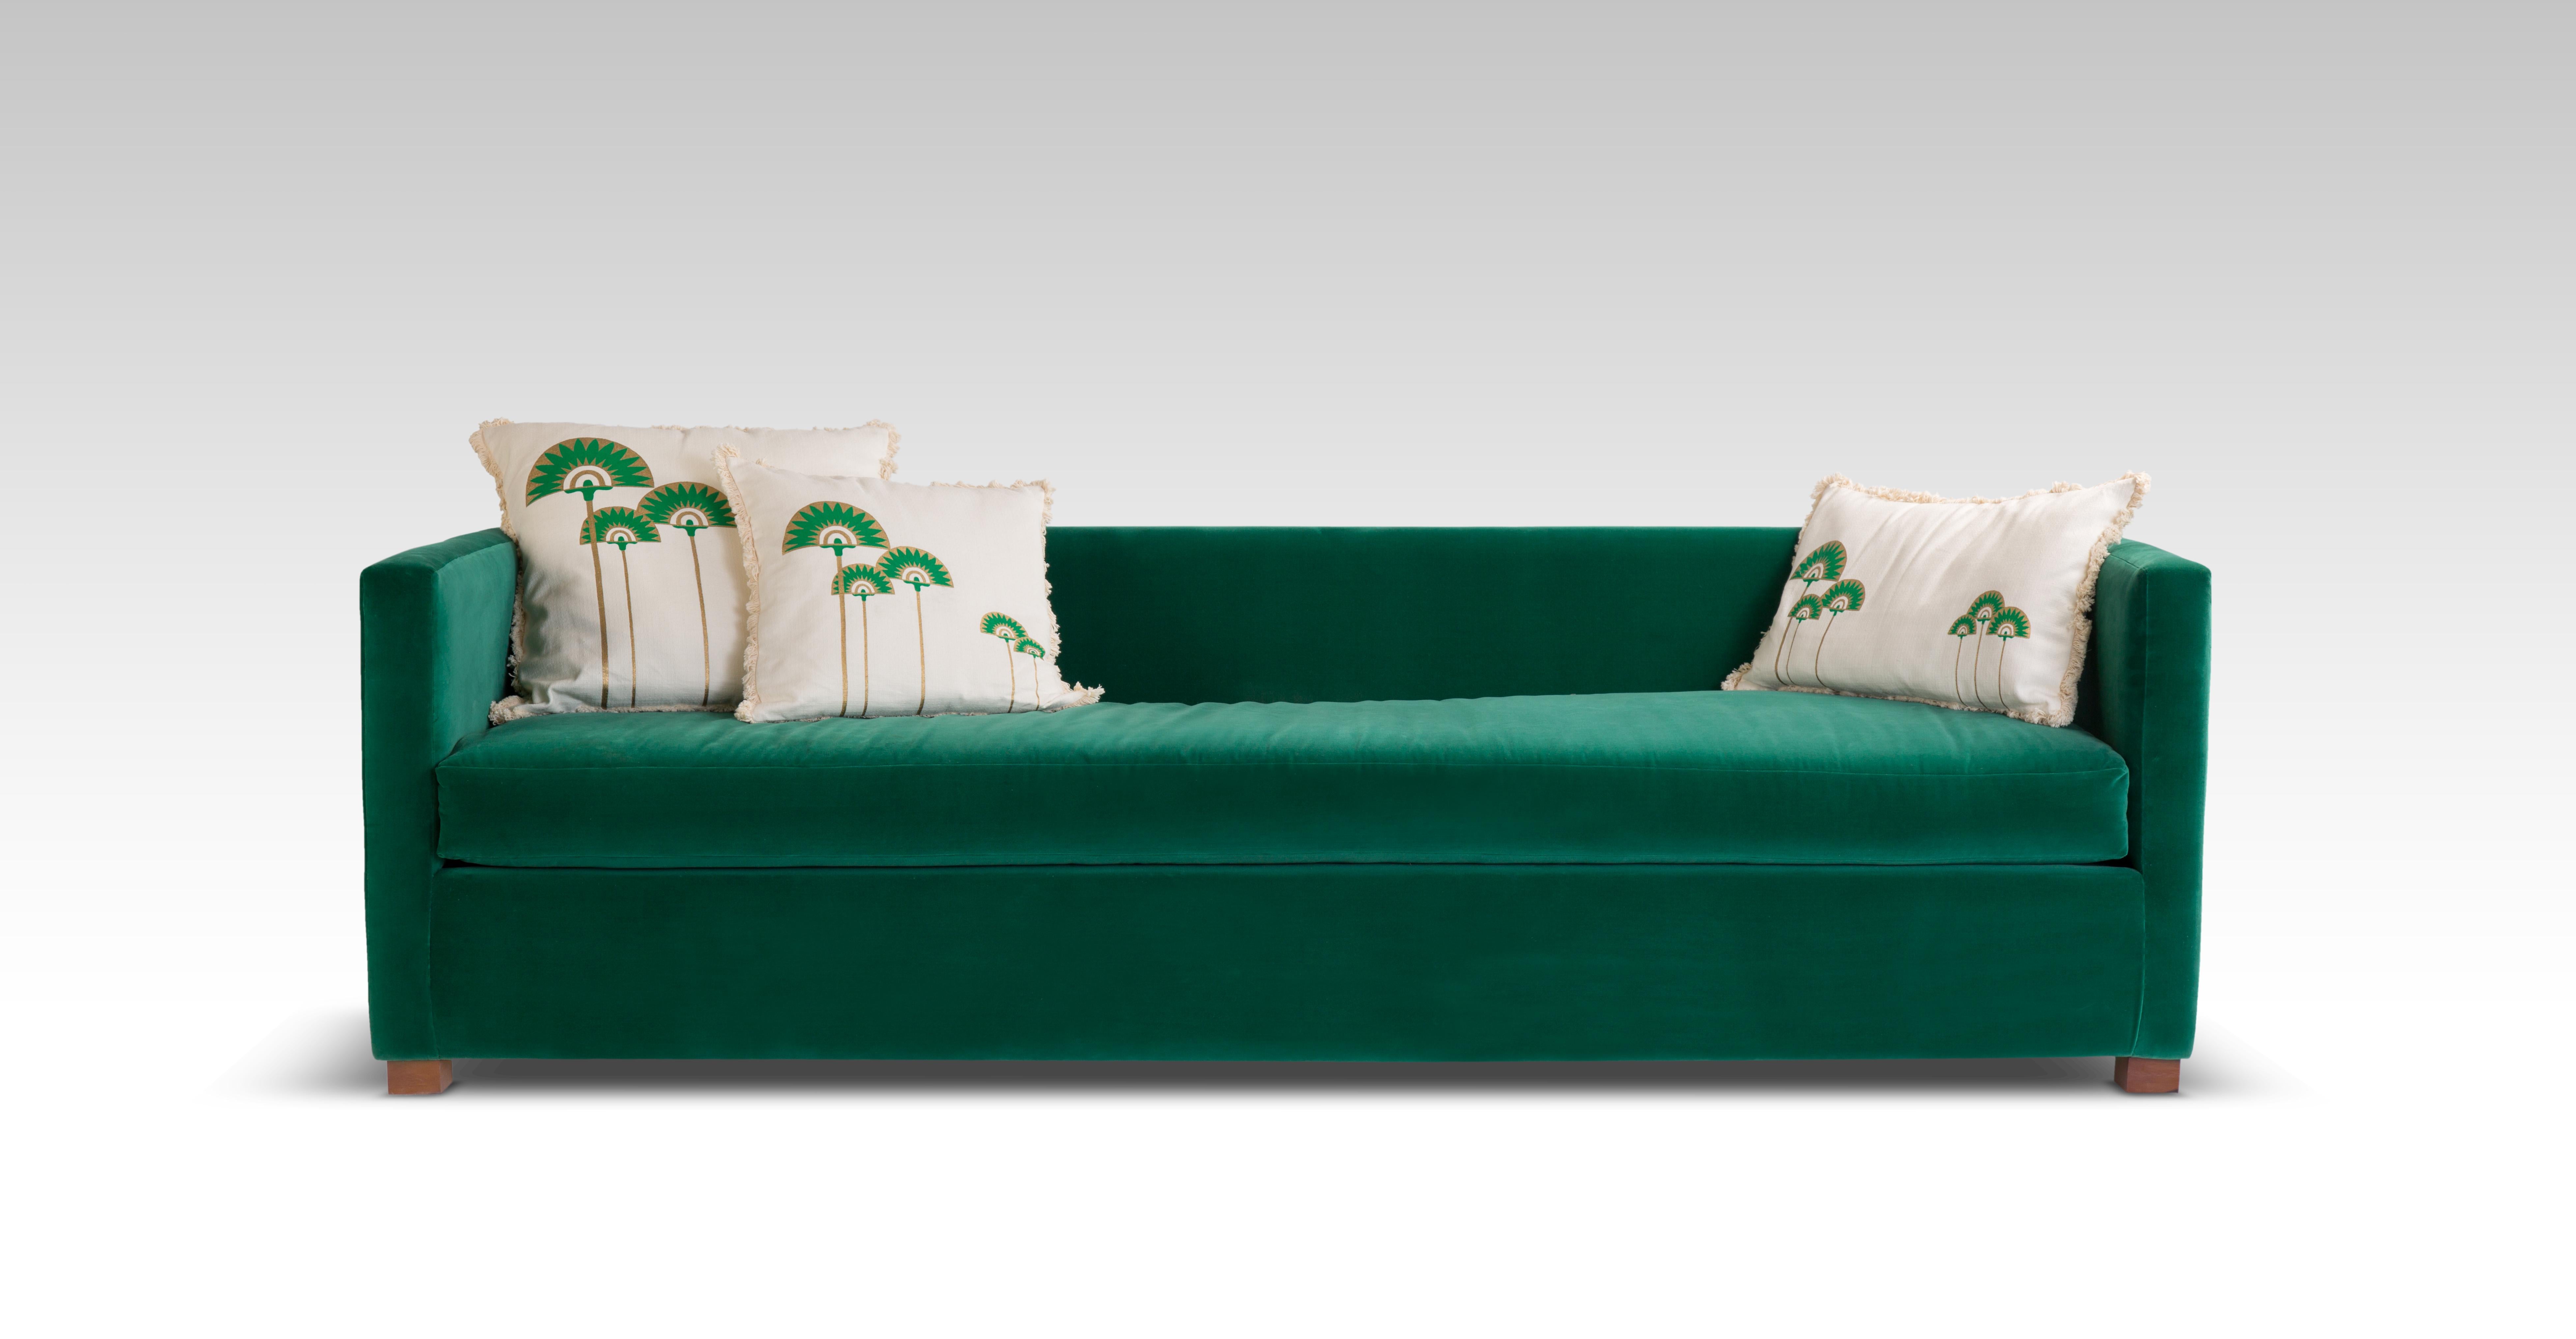 Elegant Modern 3-Seater Sofa Upholstered in Luscious Green Velvet.
Sink in and relax in our fluffy Smooth As Velvet sofa! The couch has a graceful silhouette and framed from both sides for extreme comfort. The sofa’s soft texture and deep color